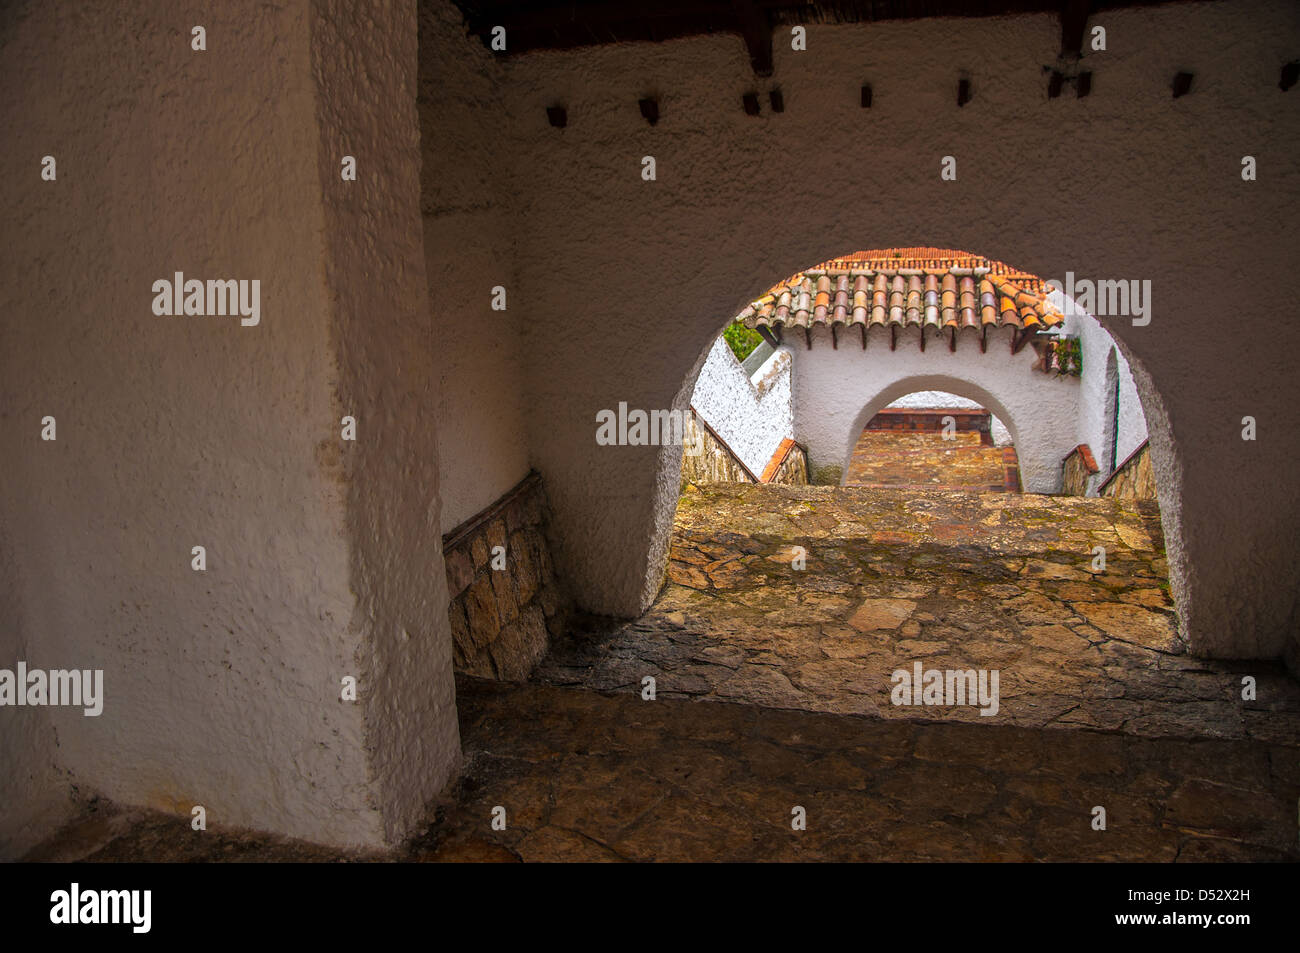 A white passageway in a colonial Colombian town Stock Photo